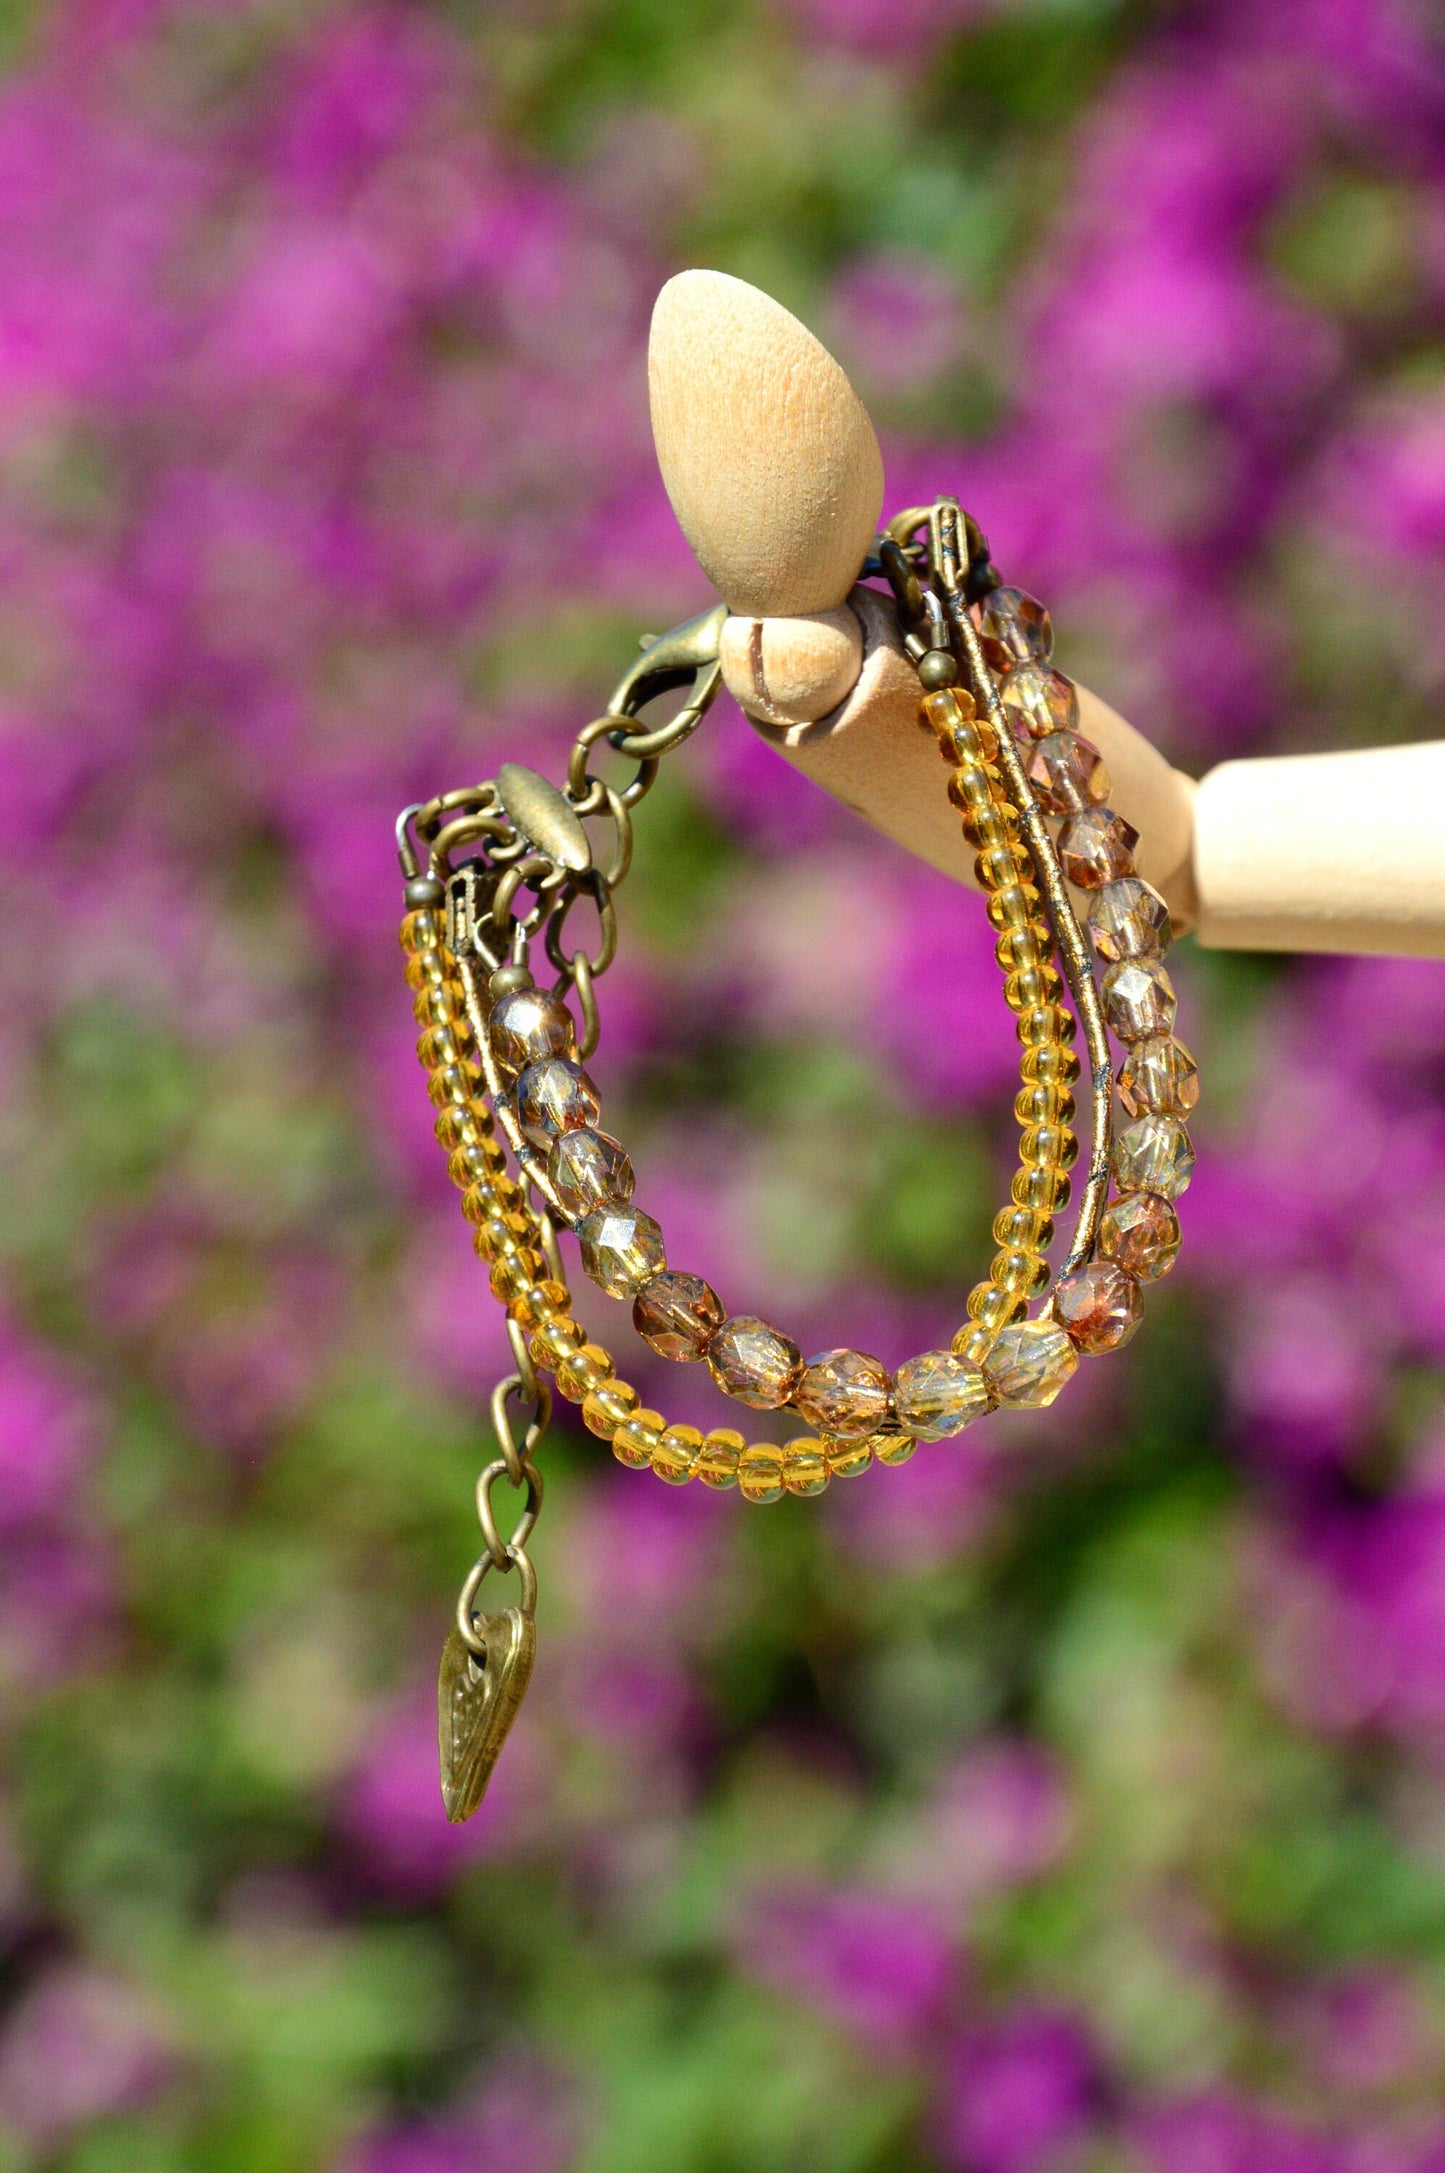 Golden Serpent Leather Wrap Bracelet: Multilayered Adjustable Women's Accessory with Bronze-Toned Glass Beads - Exude Elegance and Style.